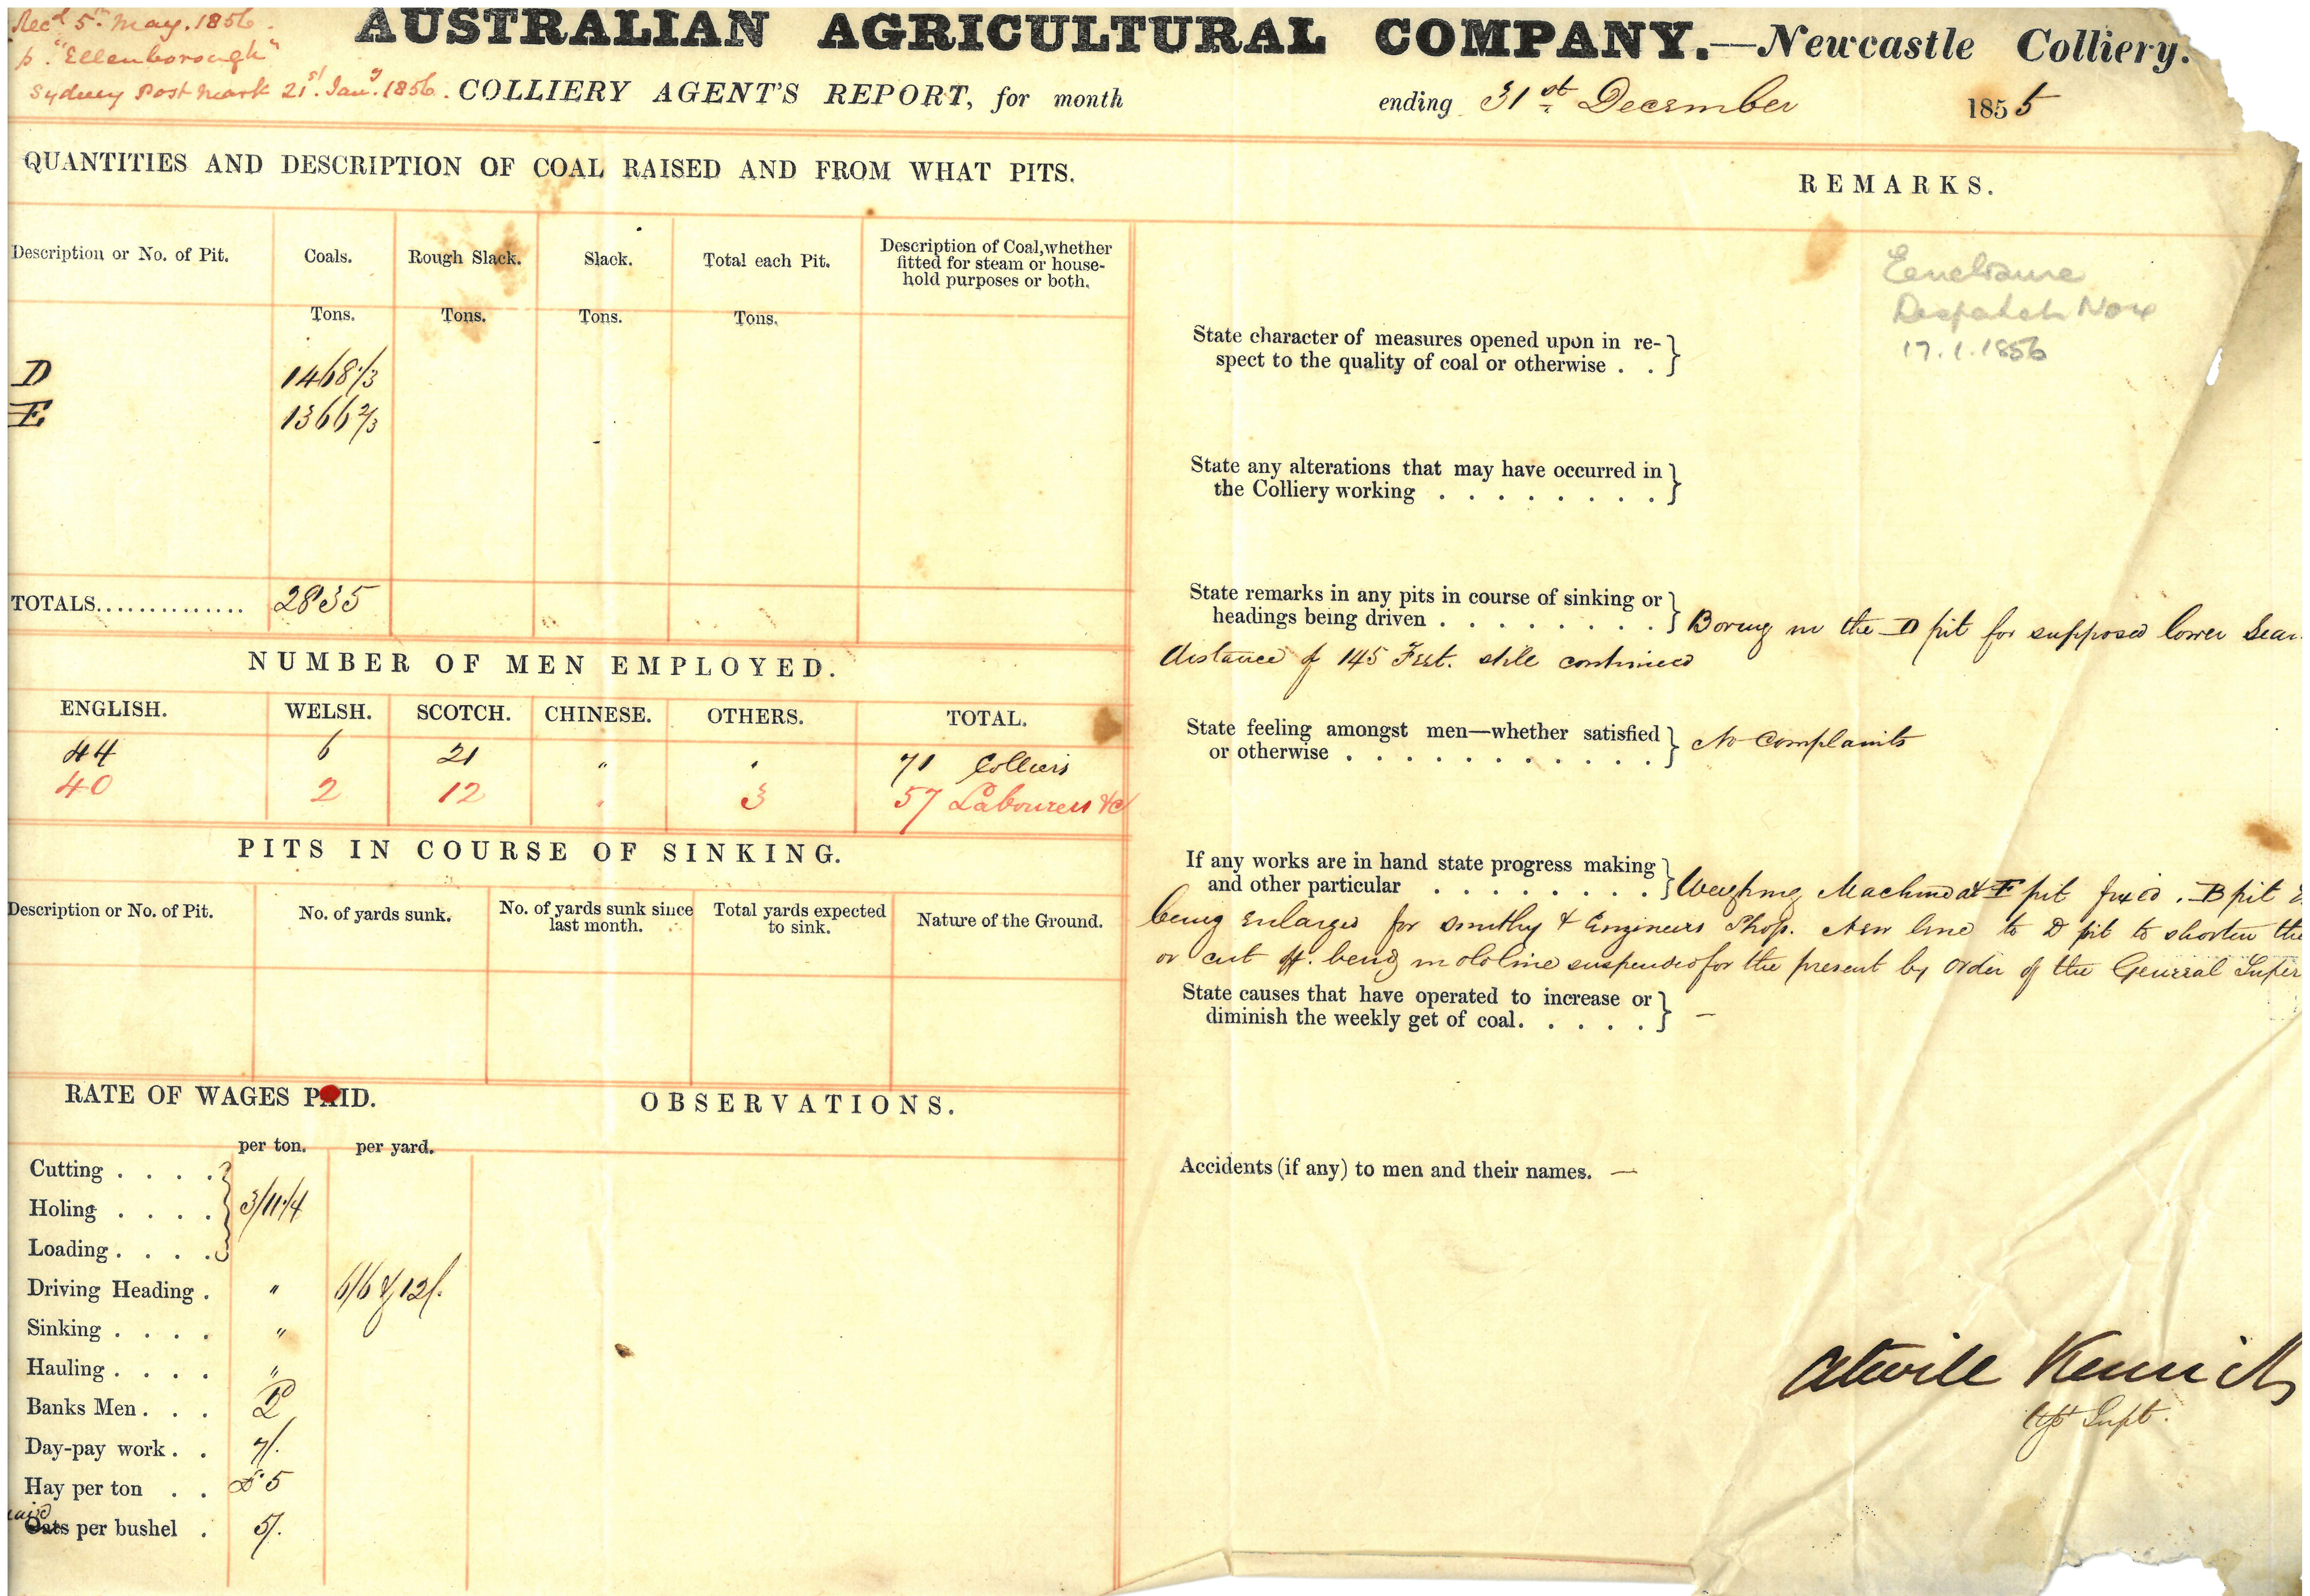 Australian Agricultural Company Newcastle Colliery agent's report for December 1855 (1-8).